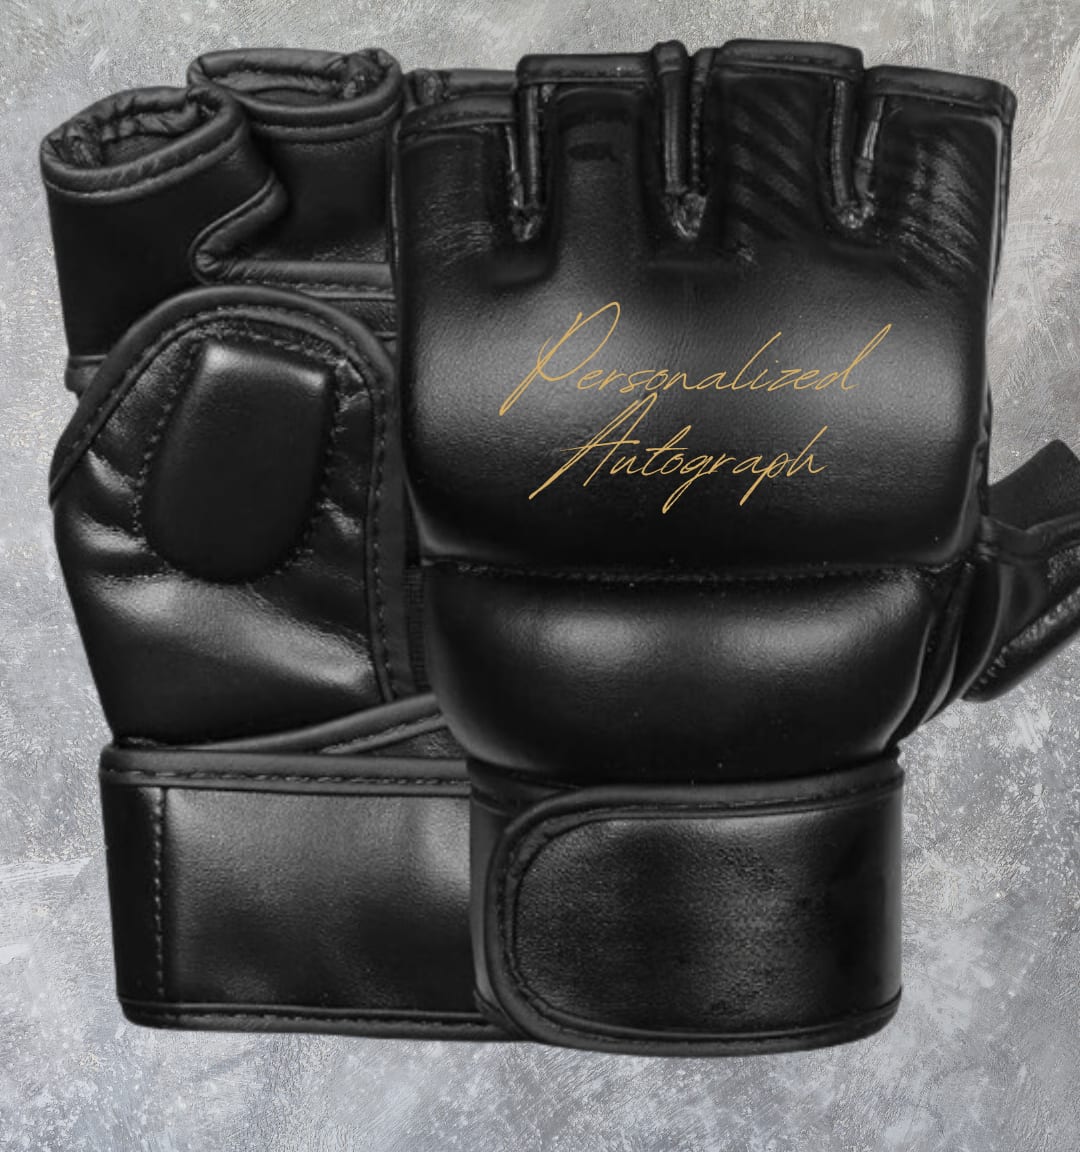 Limited Edition Cody Durden Autographed MMA Gloves